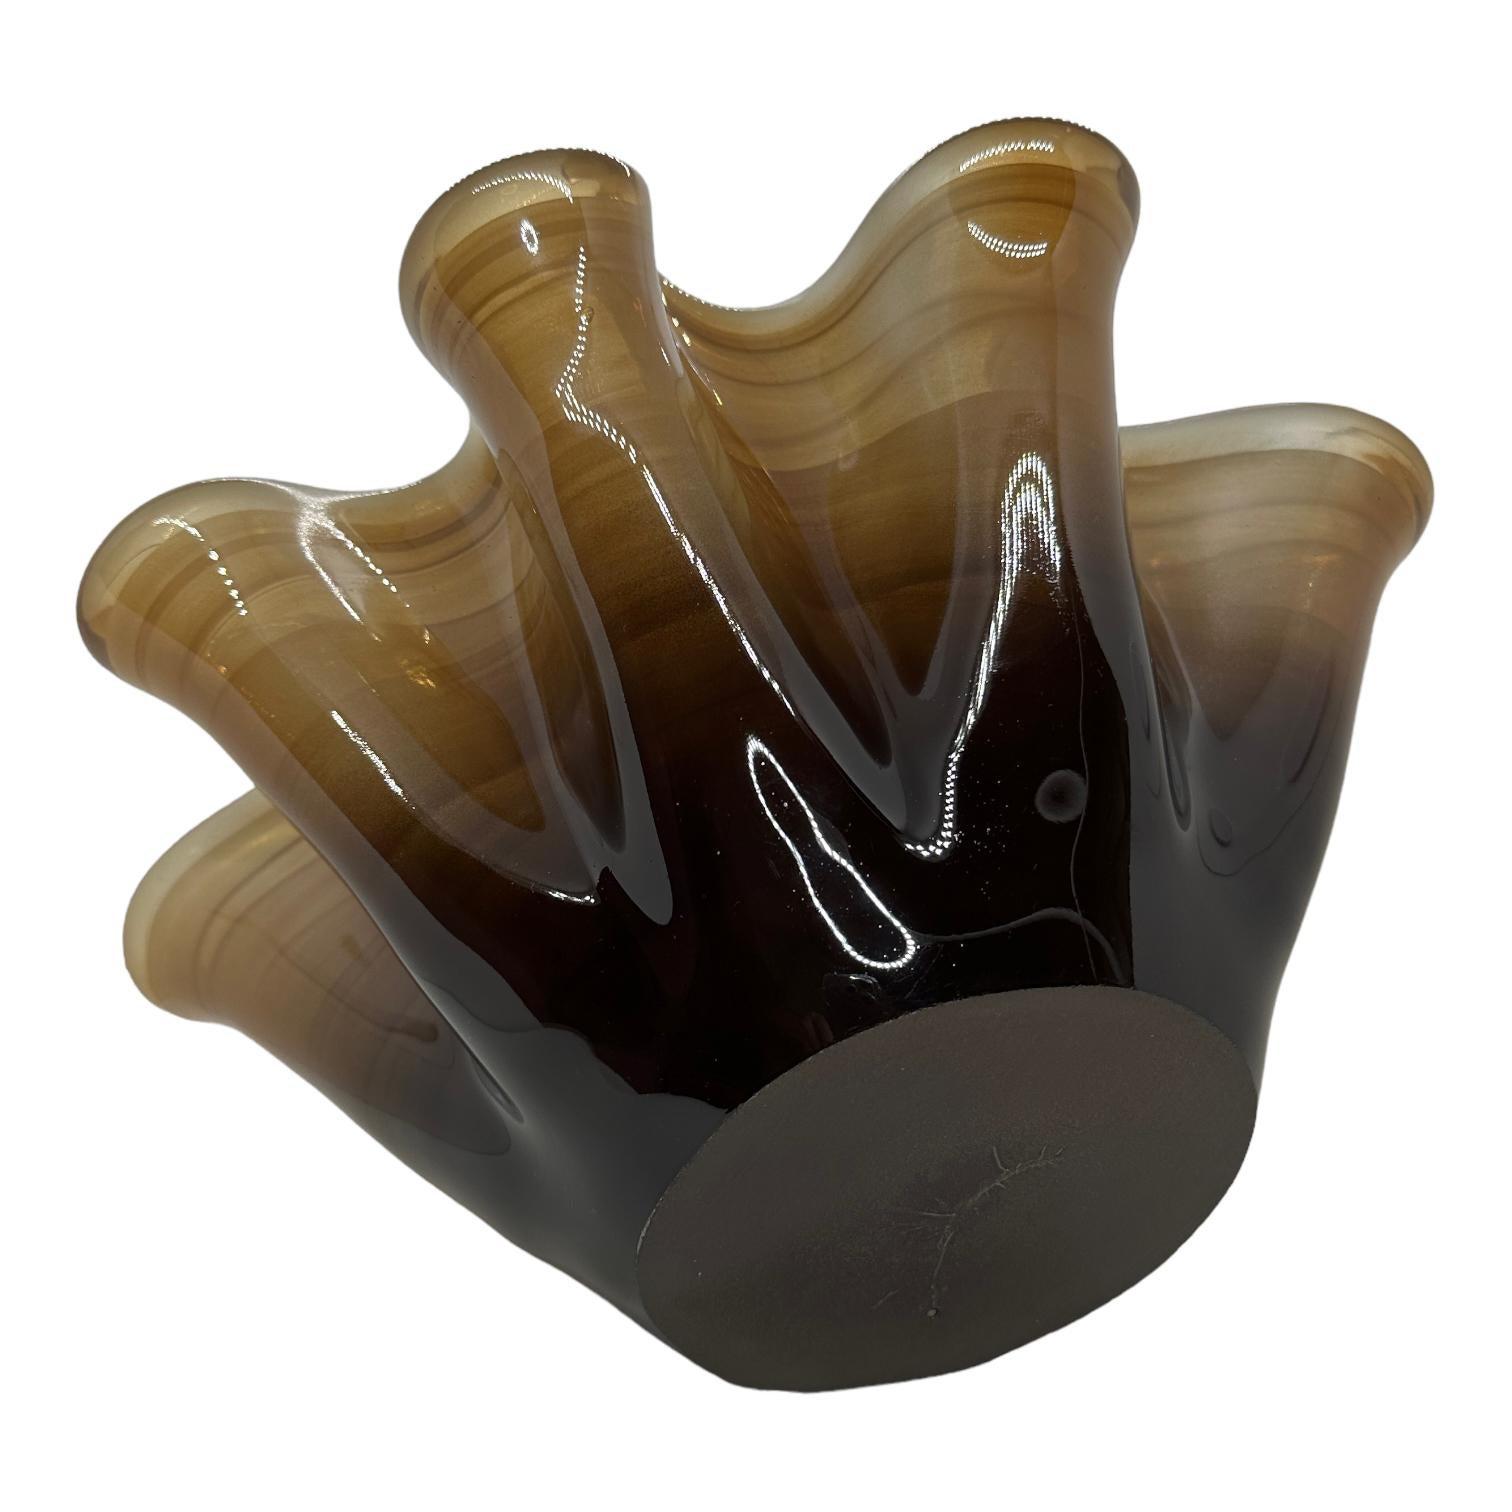 Variations of Brown Art Glass Murano Large Handkerchief Bowl, Modern, 1980s For Sale 2